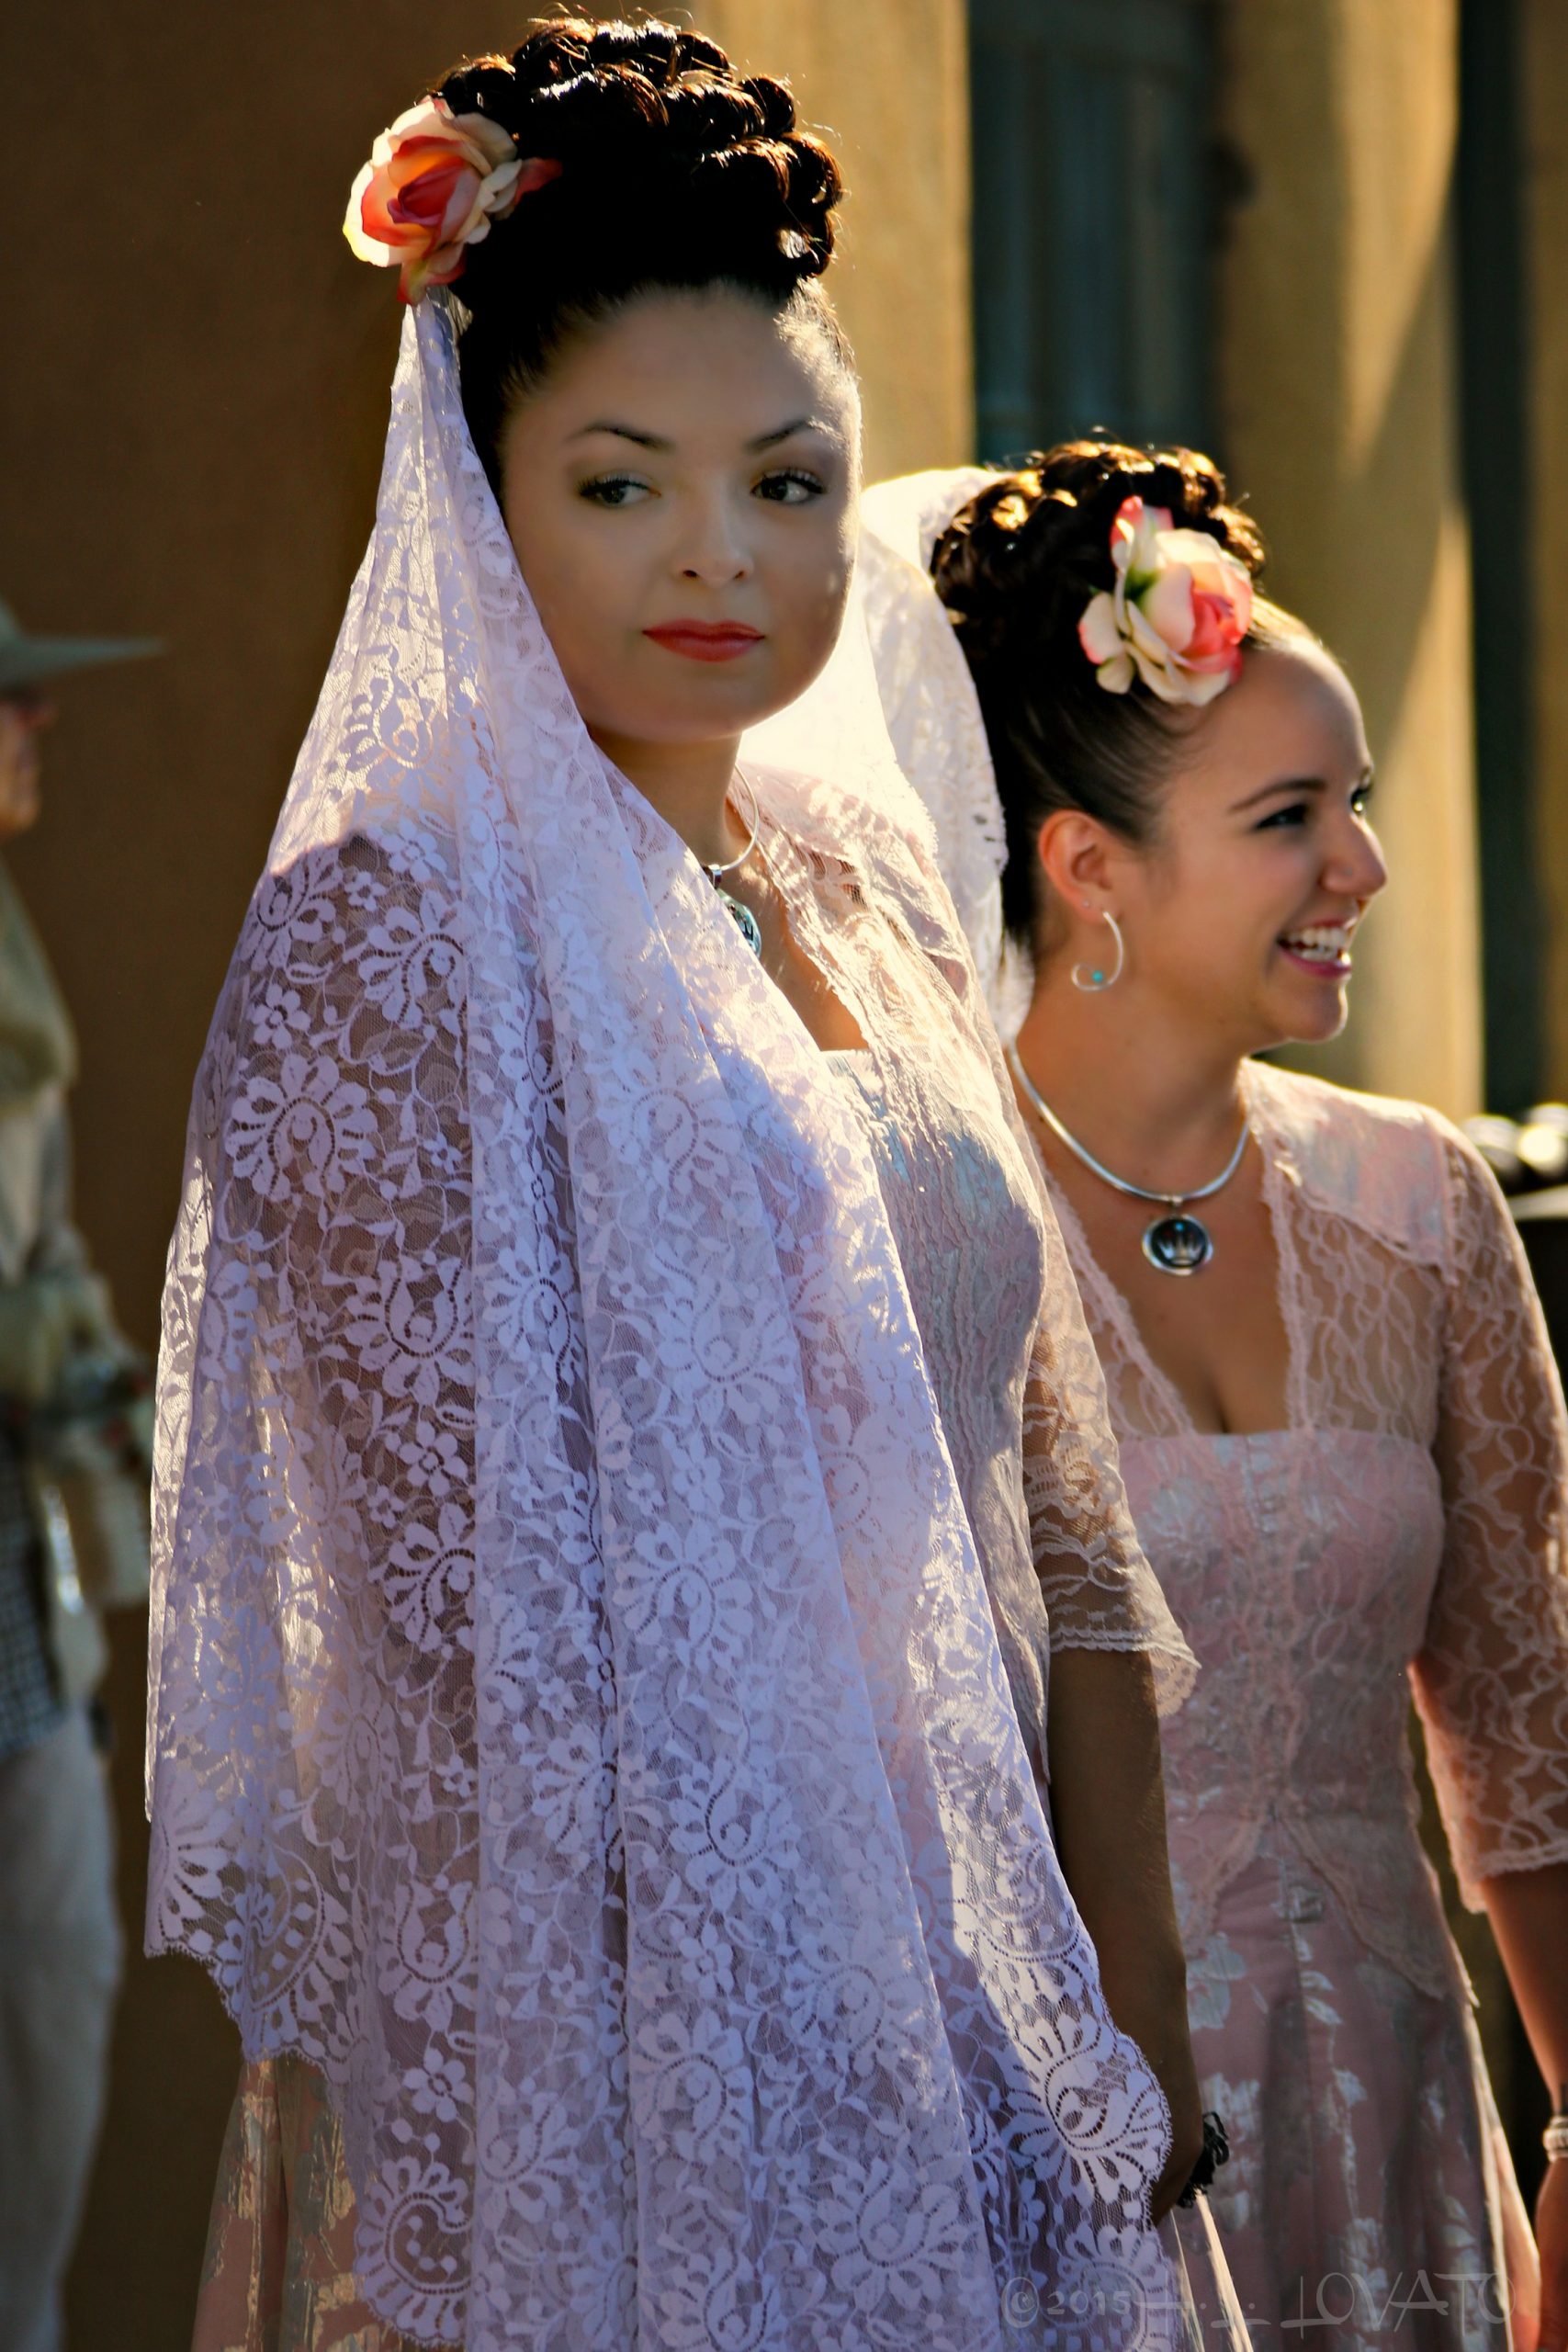 Two young women dressed in lace gowns